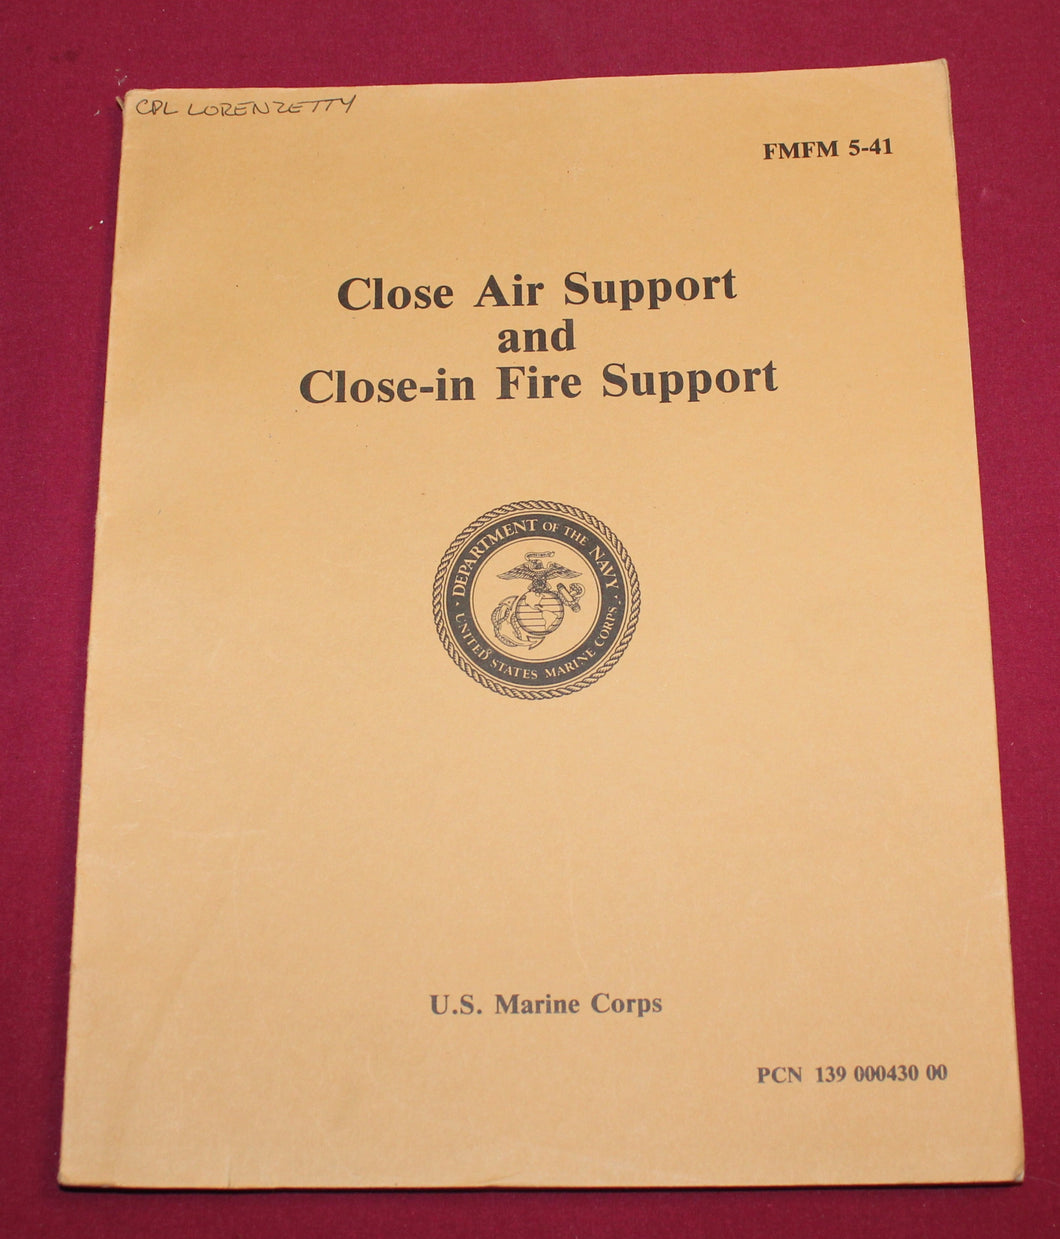 FMFM 5-41 Close Air Support and Close-in Fire Support